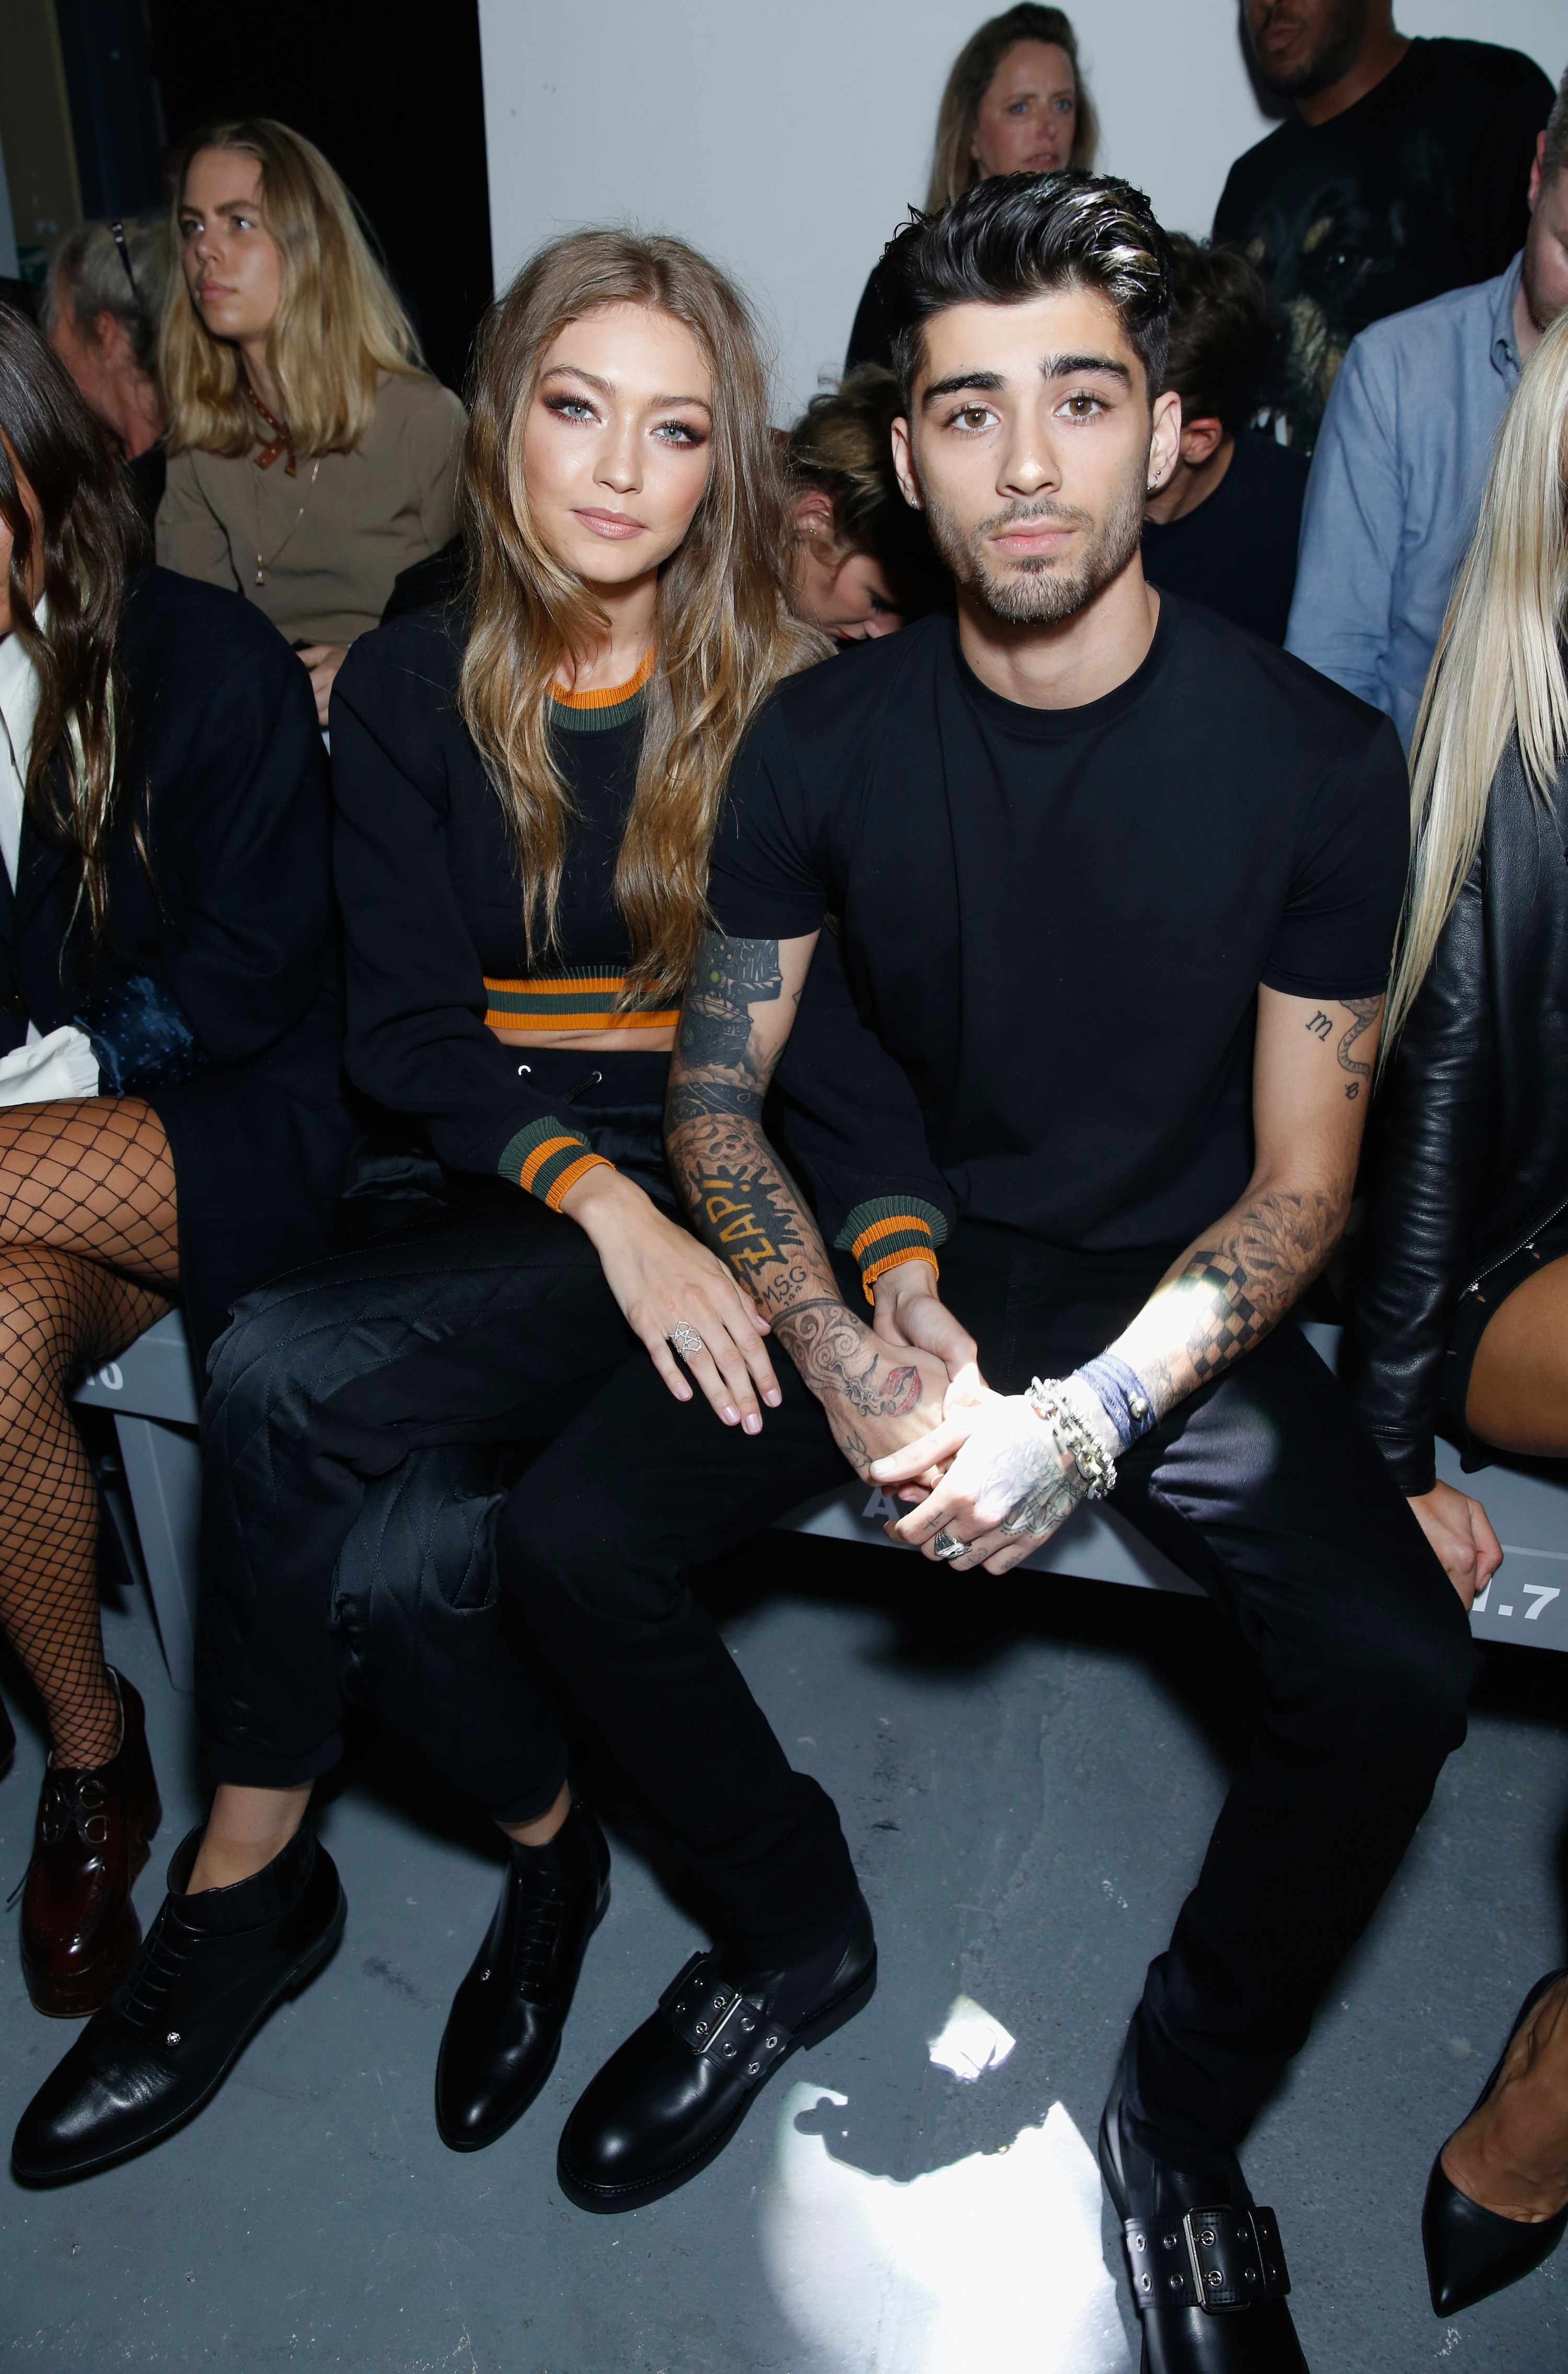 Gigi and Zayn together back when they were dating